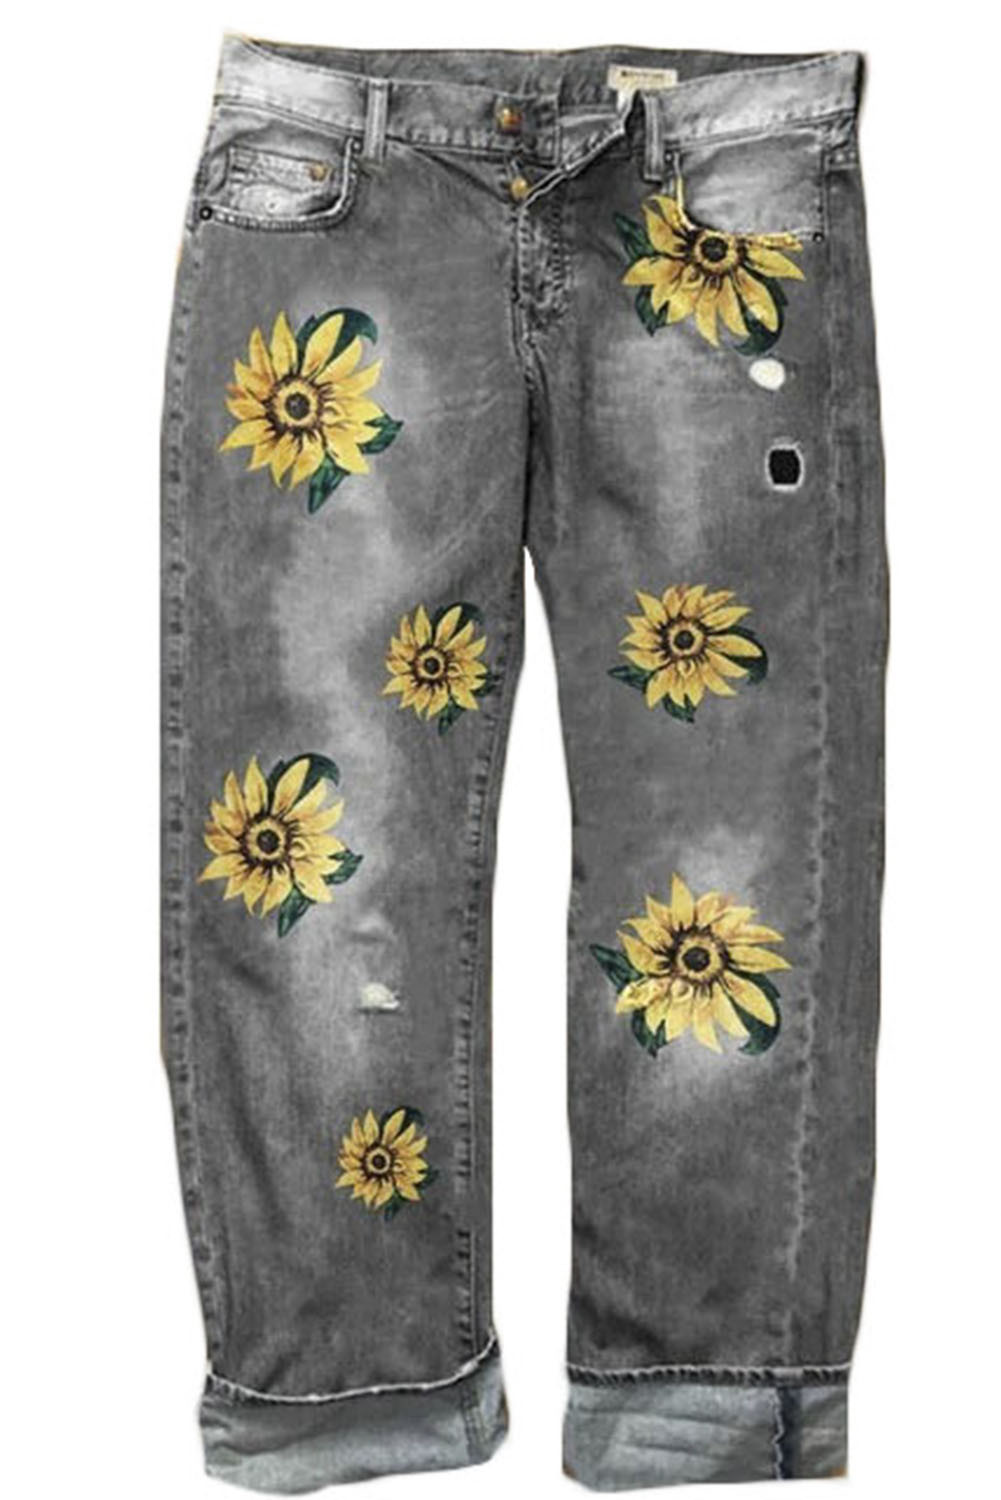 US$ 16.98 Gray Sunflower Printed Washed Straight Casual Jeans Wholesale